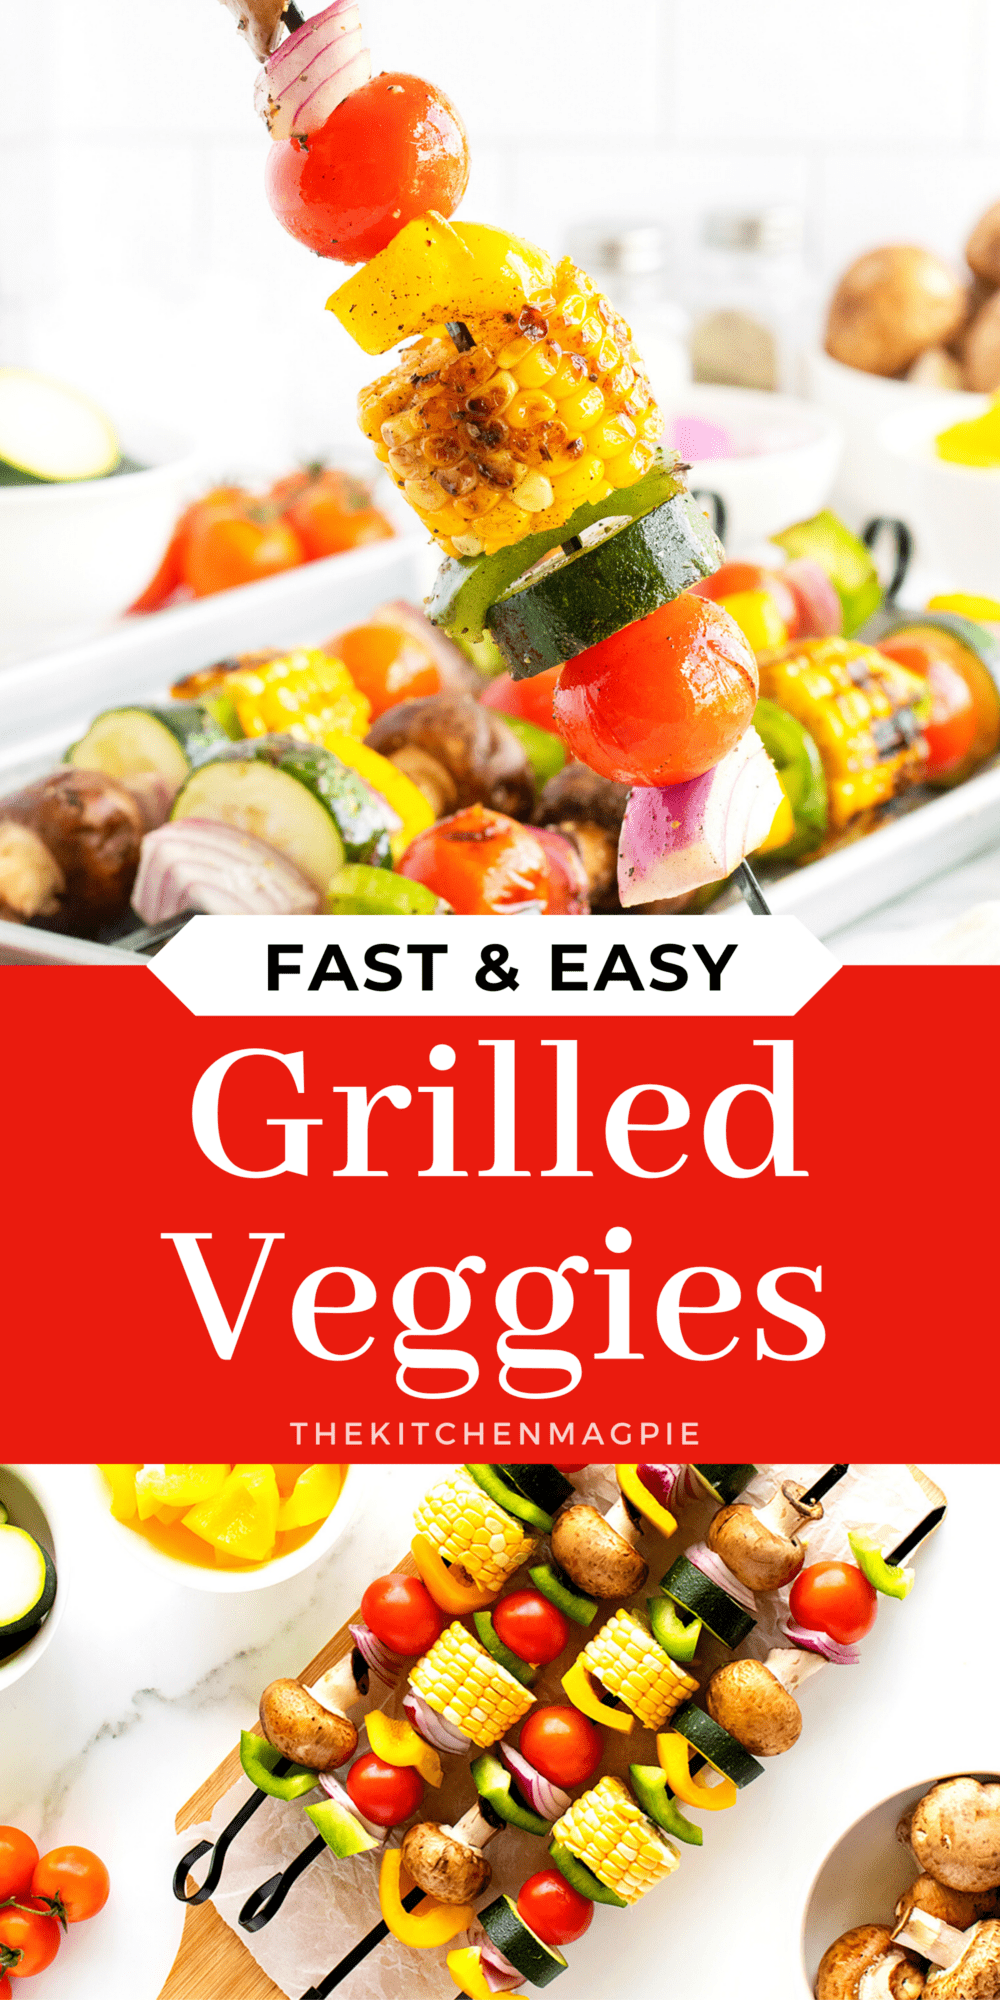 Done right, grilled veggies should be a bit charred, crispy, and super delicious, perfect as a main for a vegetarian or as the side dish for some grilled meats.